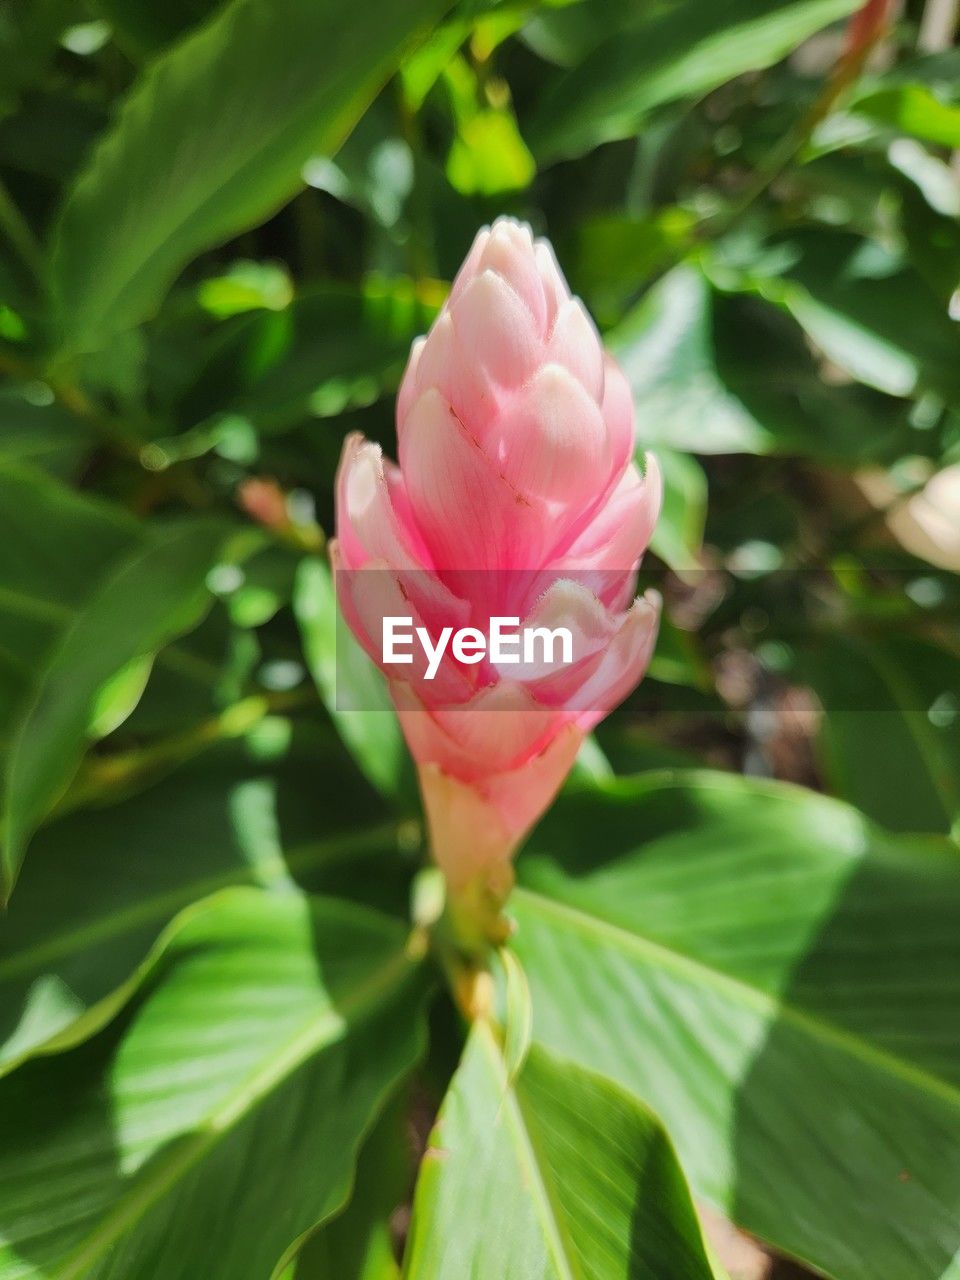 plant, flower, flowering plant, leaf, plant part, beauty in nature, freshness, pink, close-up, nature, petal, green, fragility, growth, flower head, rose, inflorescence, no people, outdoors, blossom, botany